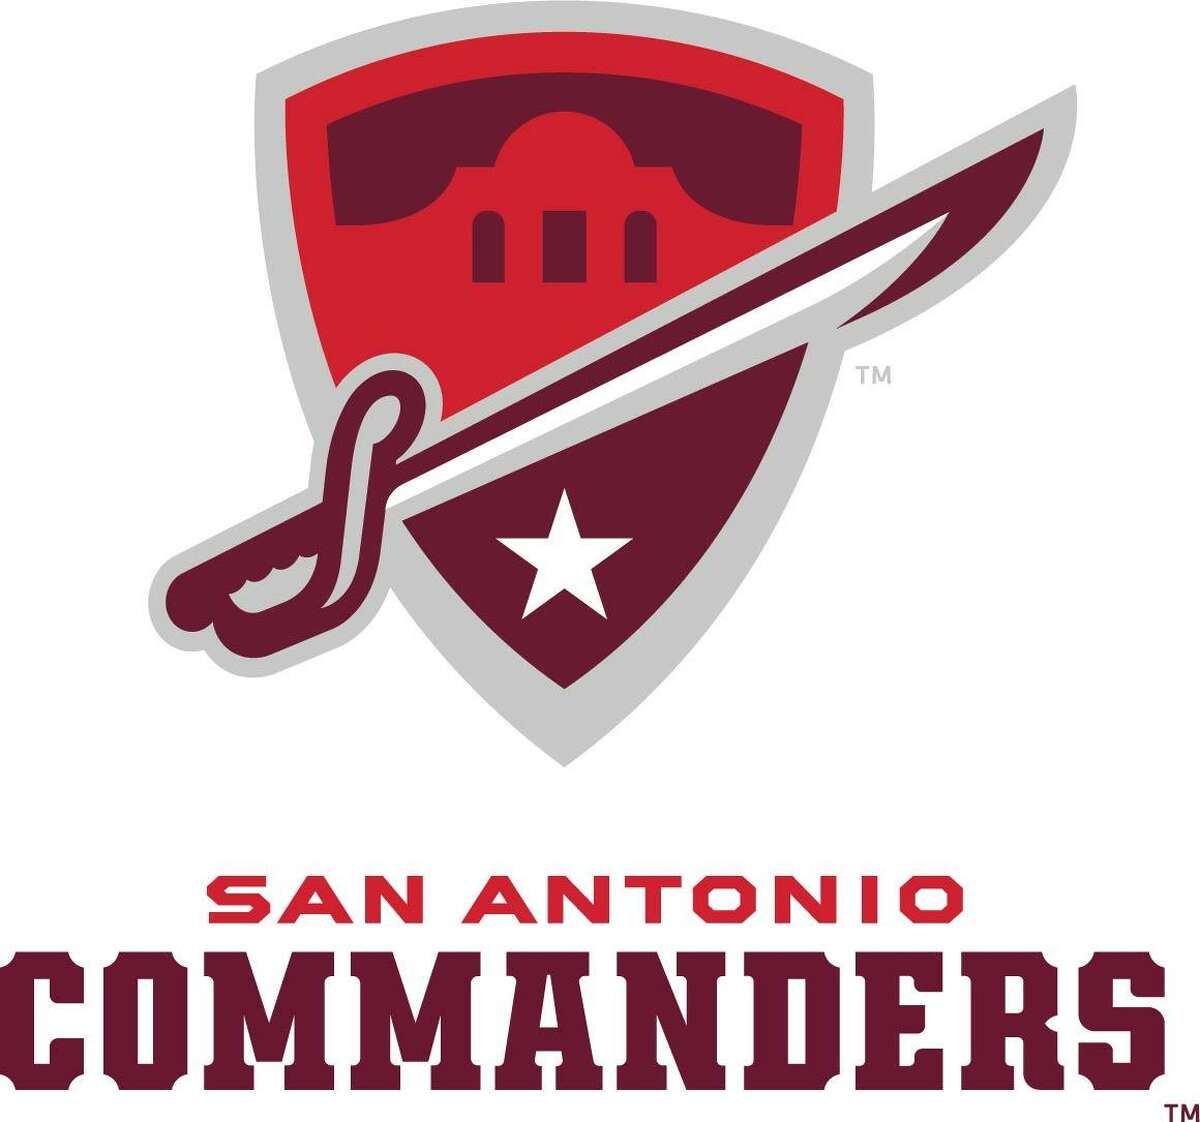 San Antonio has a new football team! And it's called what?